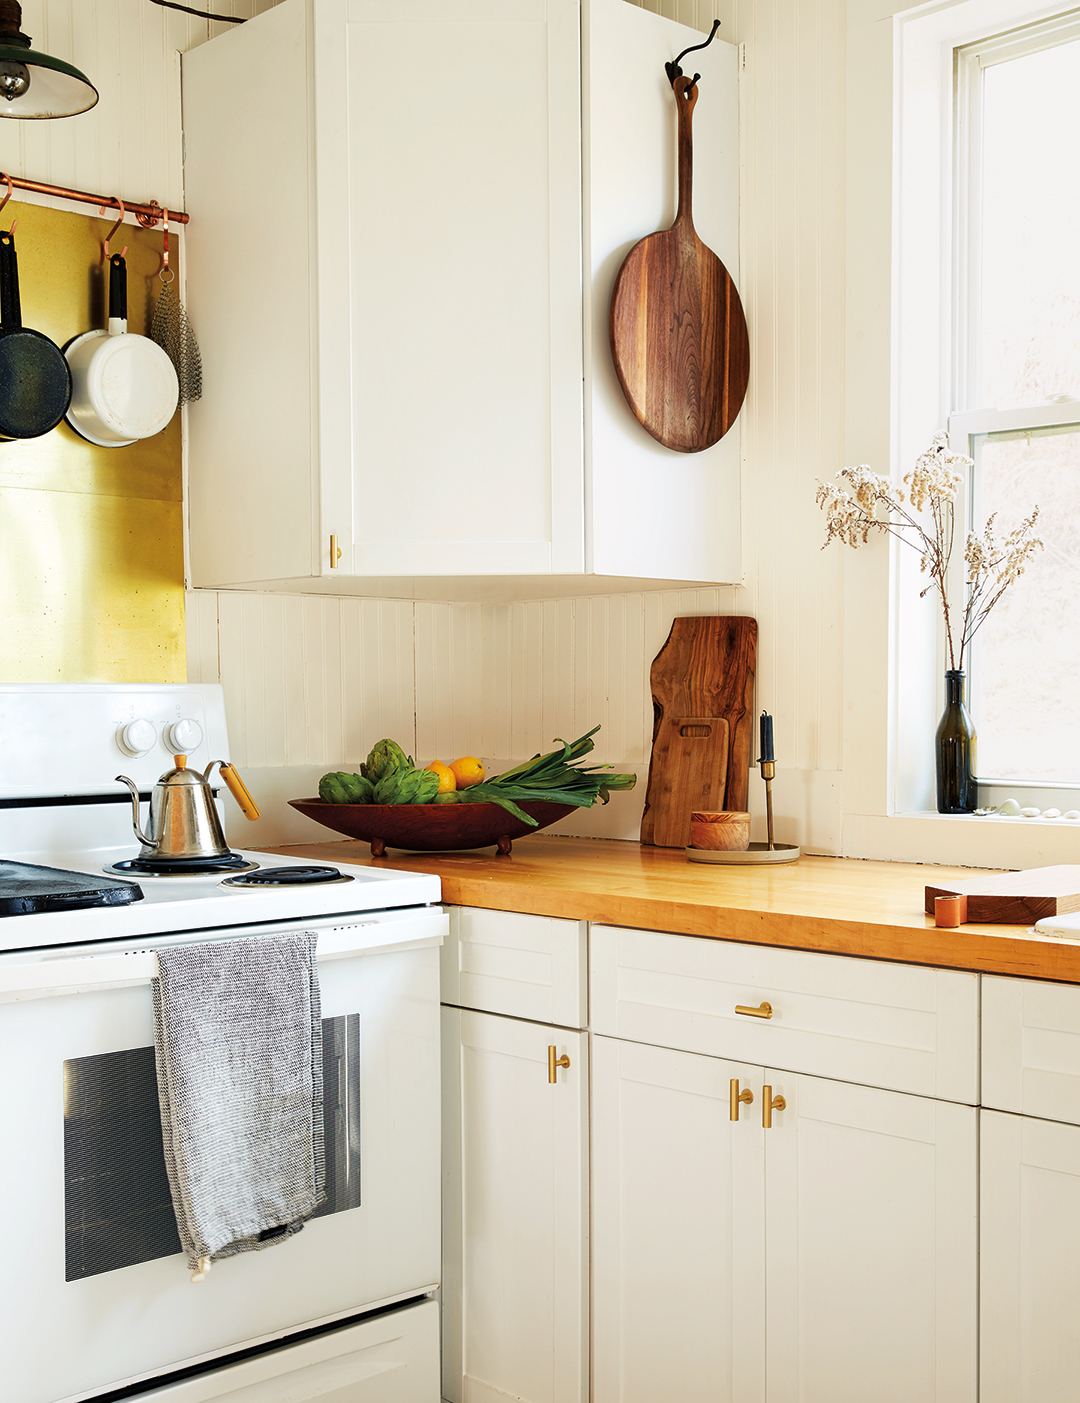 How to Organize Corner Kitchen Cabinets (5 Great Ideas to Consider